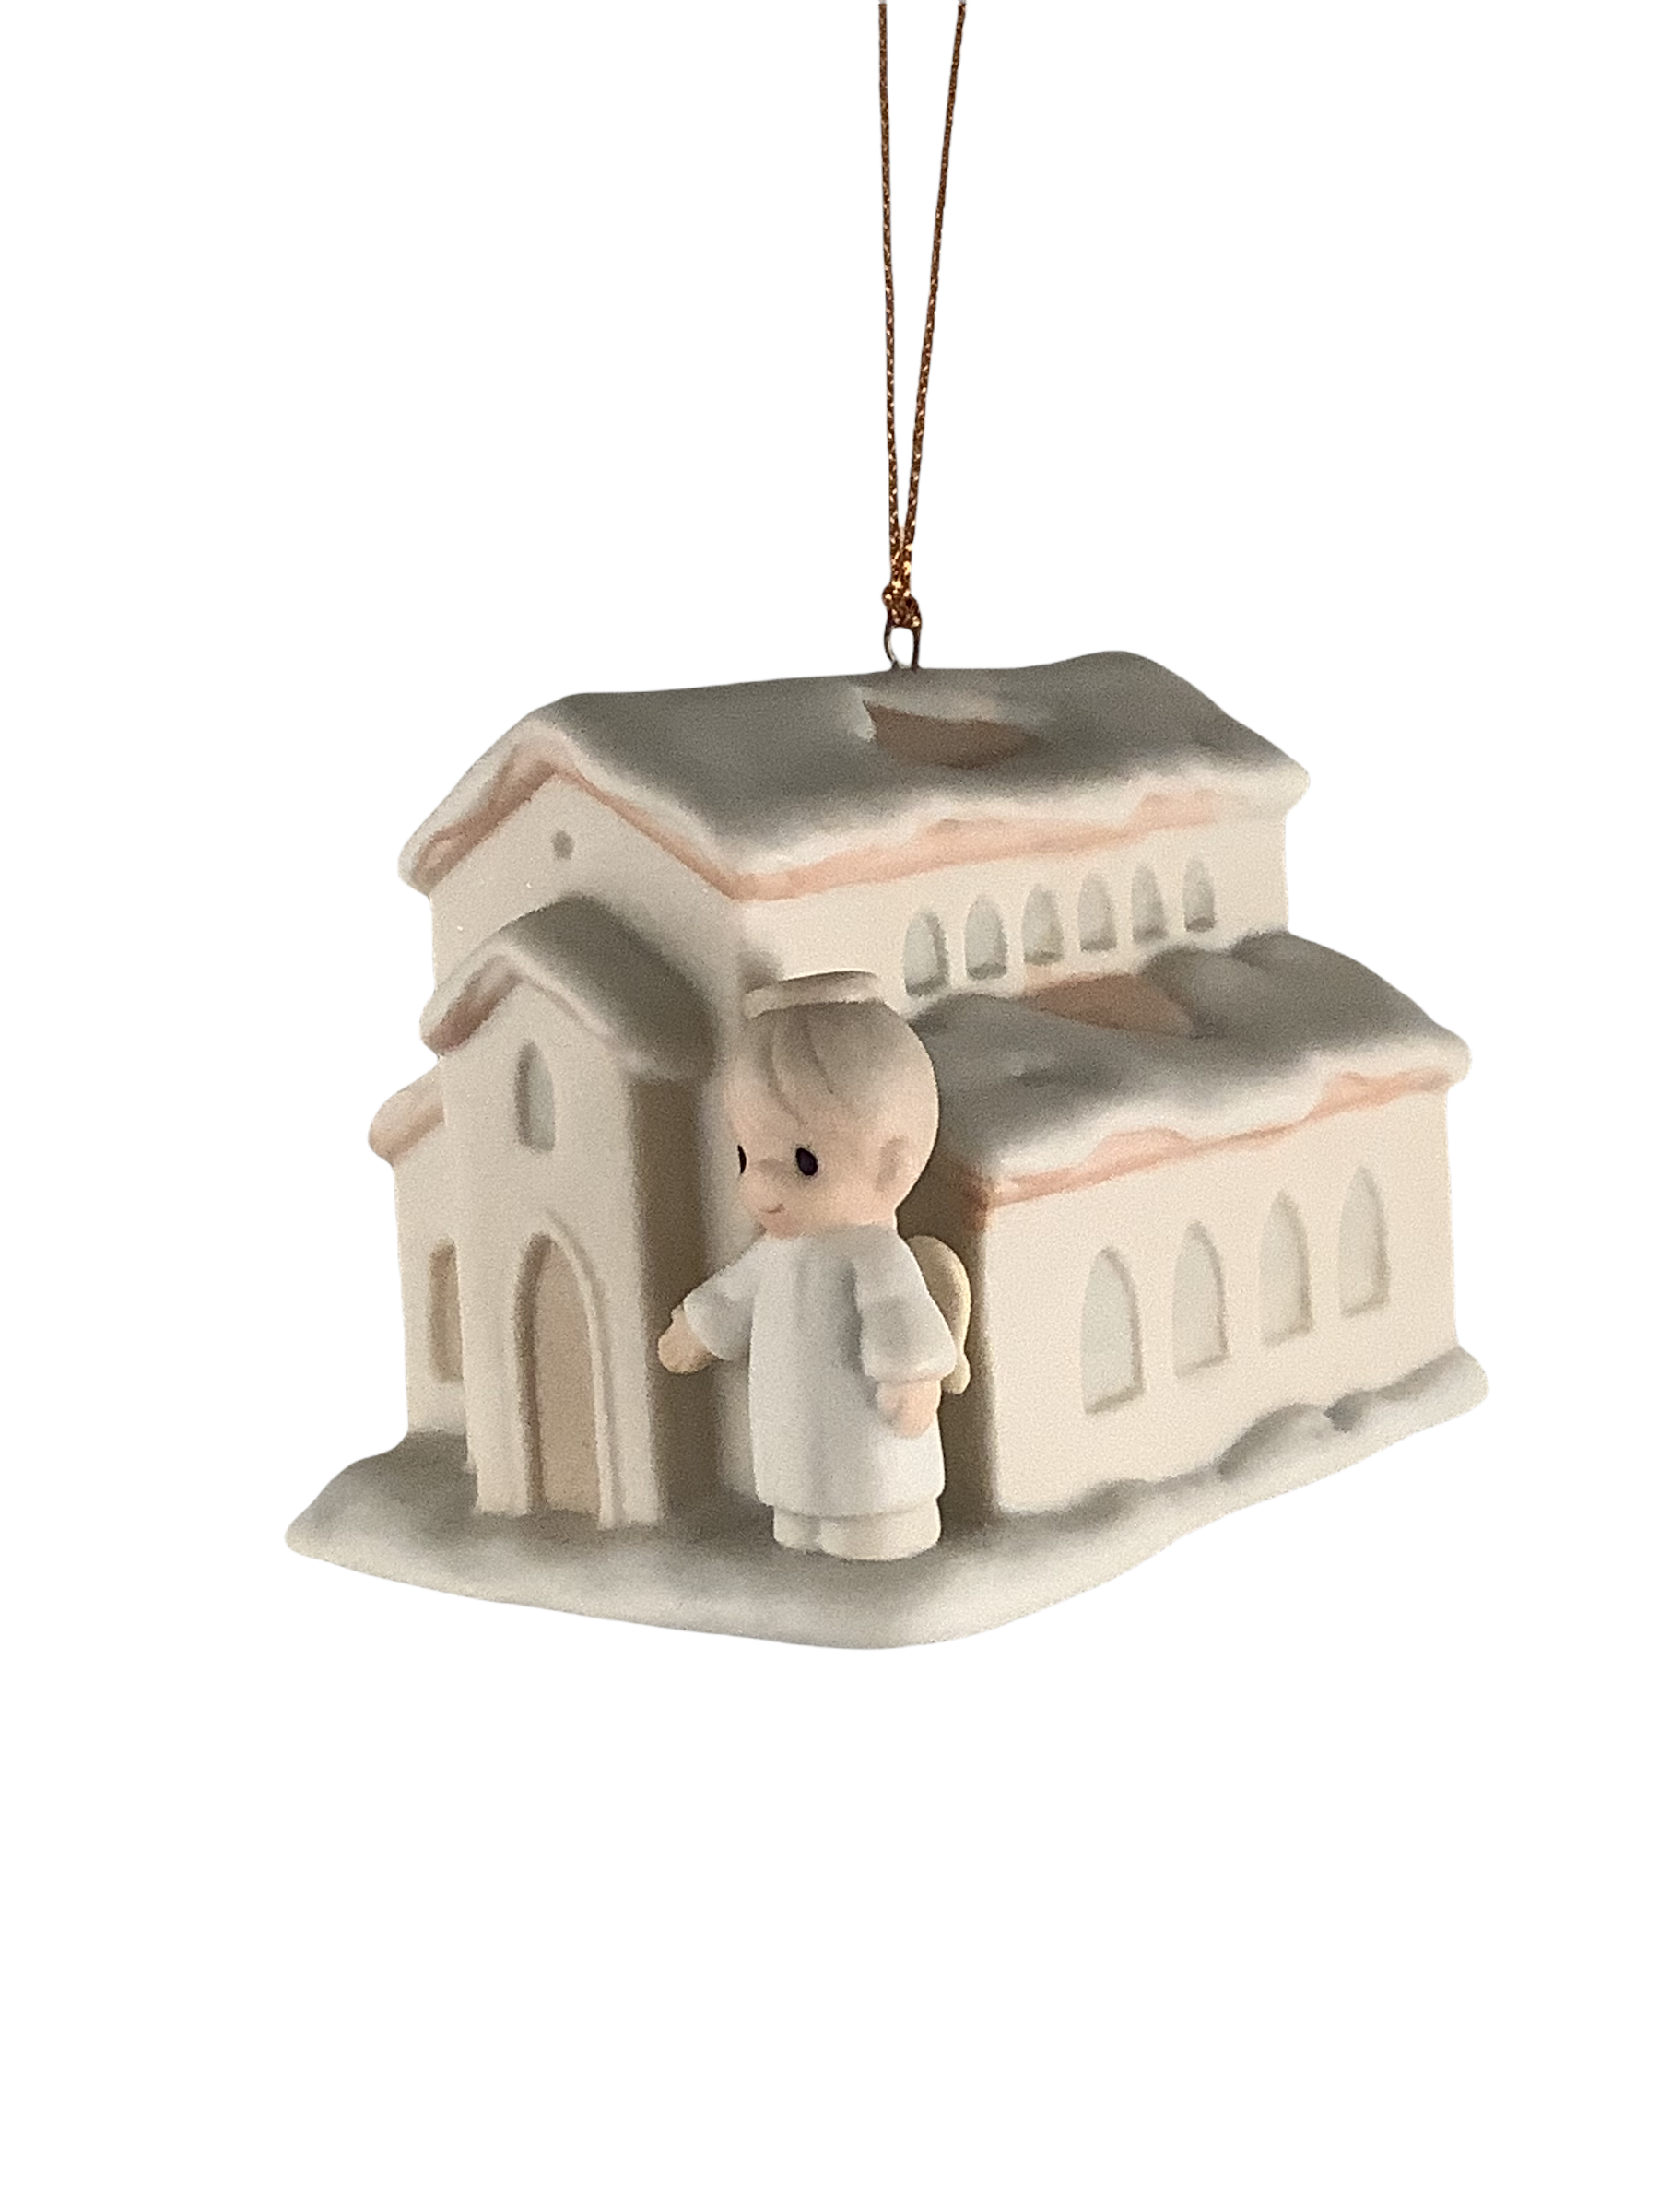 There's A Christian Welcome Here - Precious Moment Ornament